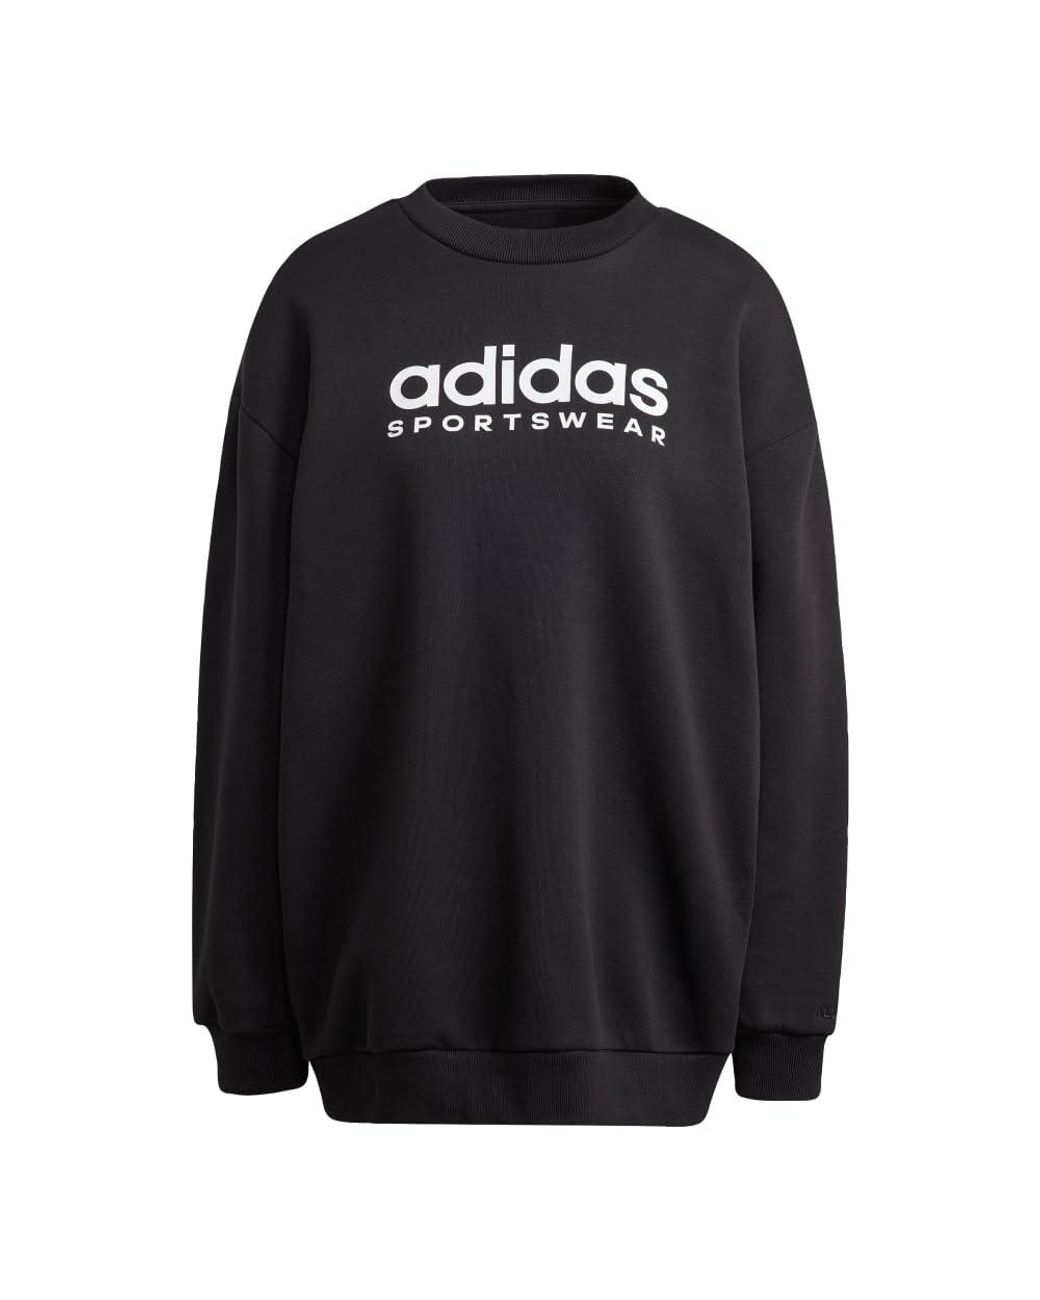 adidas All Szn Graphics Sweater in Black | Lyst